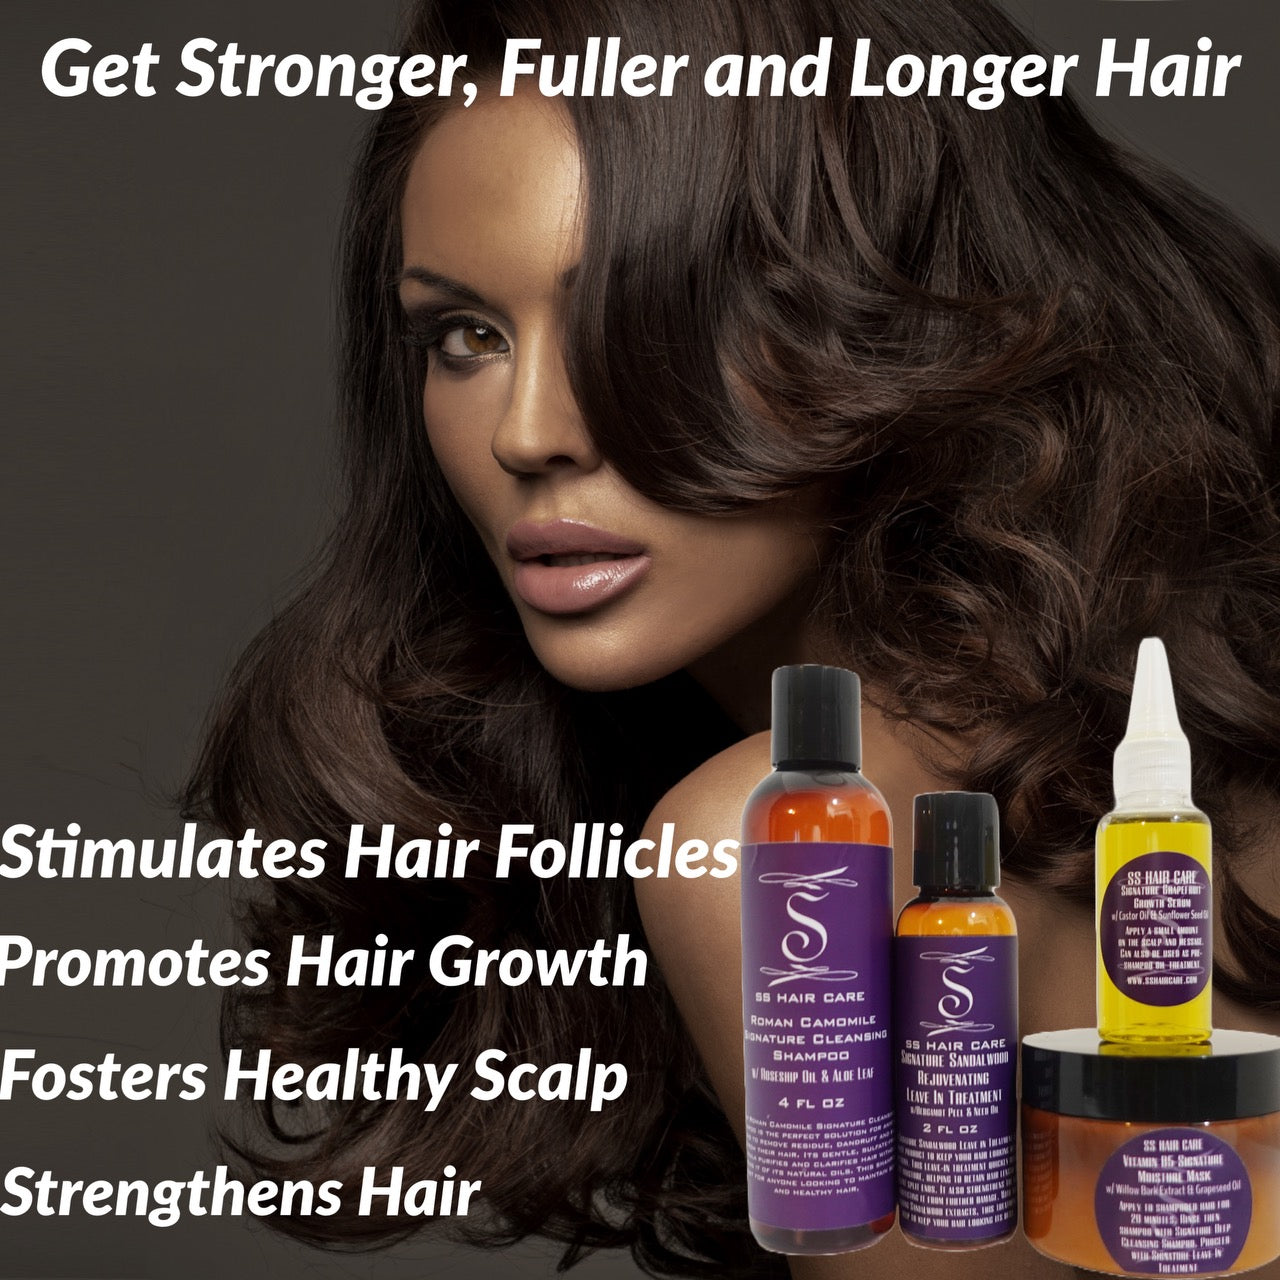 SS Hair Care Growth Retention System For Relaxed Hair® ⭐⭐⭐⭐⭐